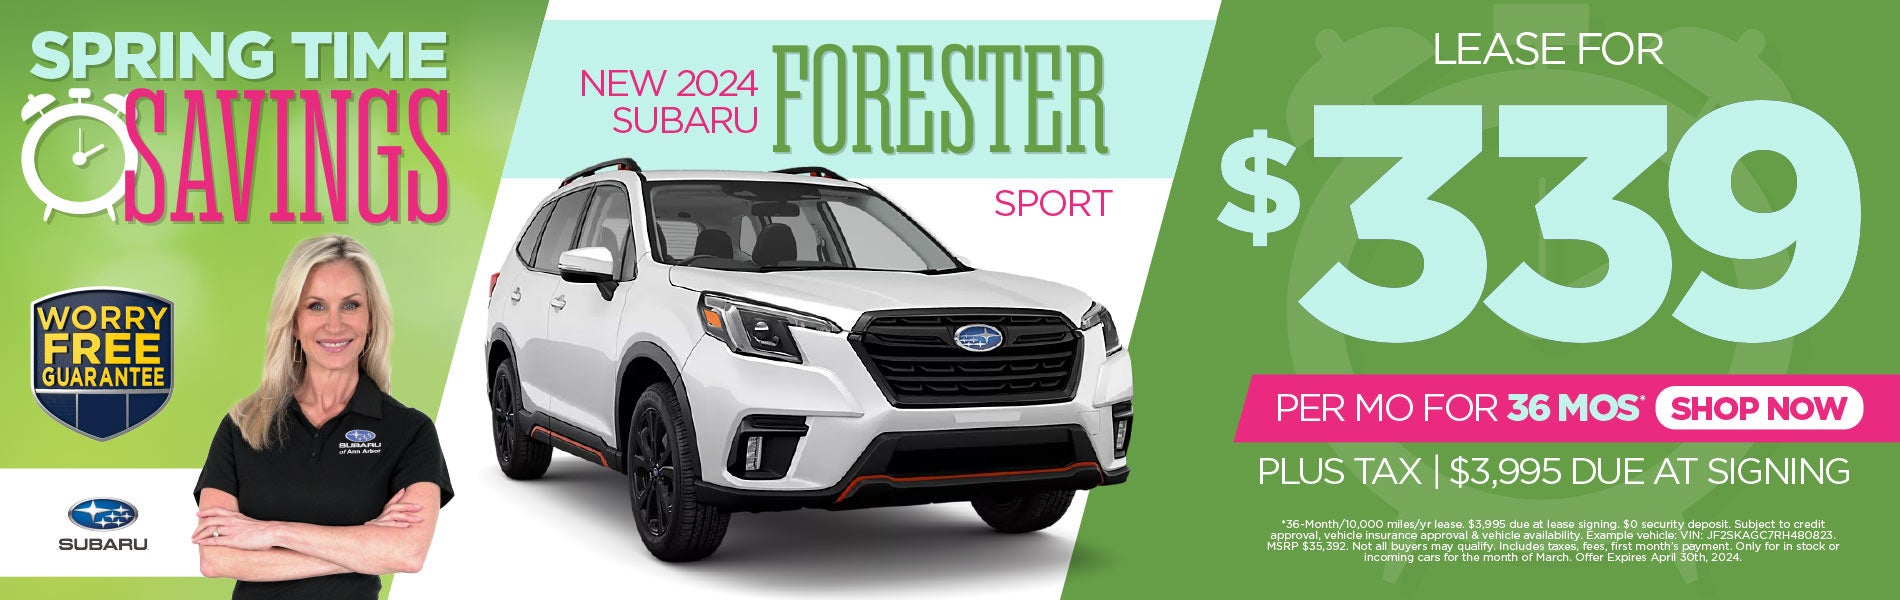 New 2024 Subaru Forester Sport lease for $339/Mo*